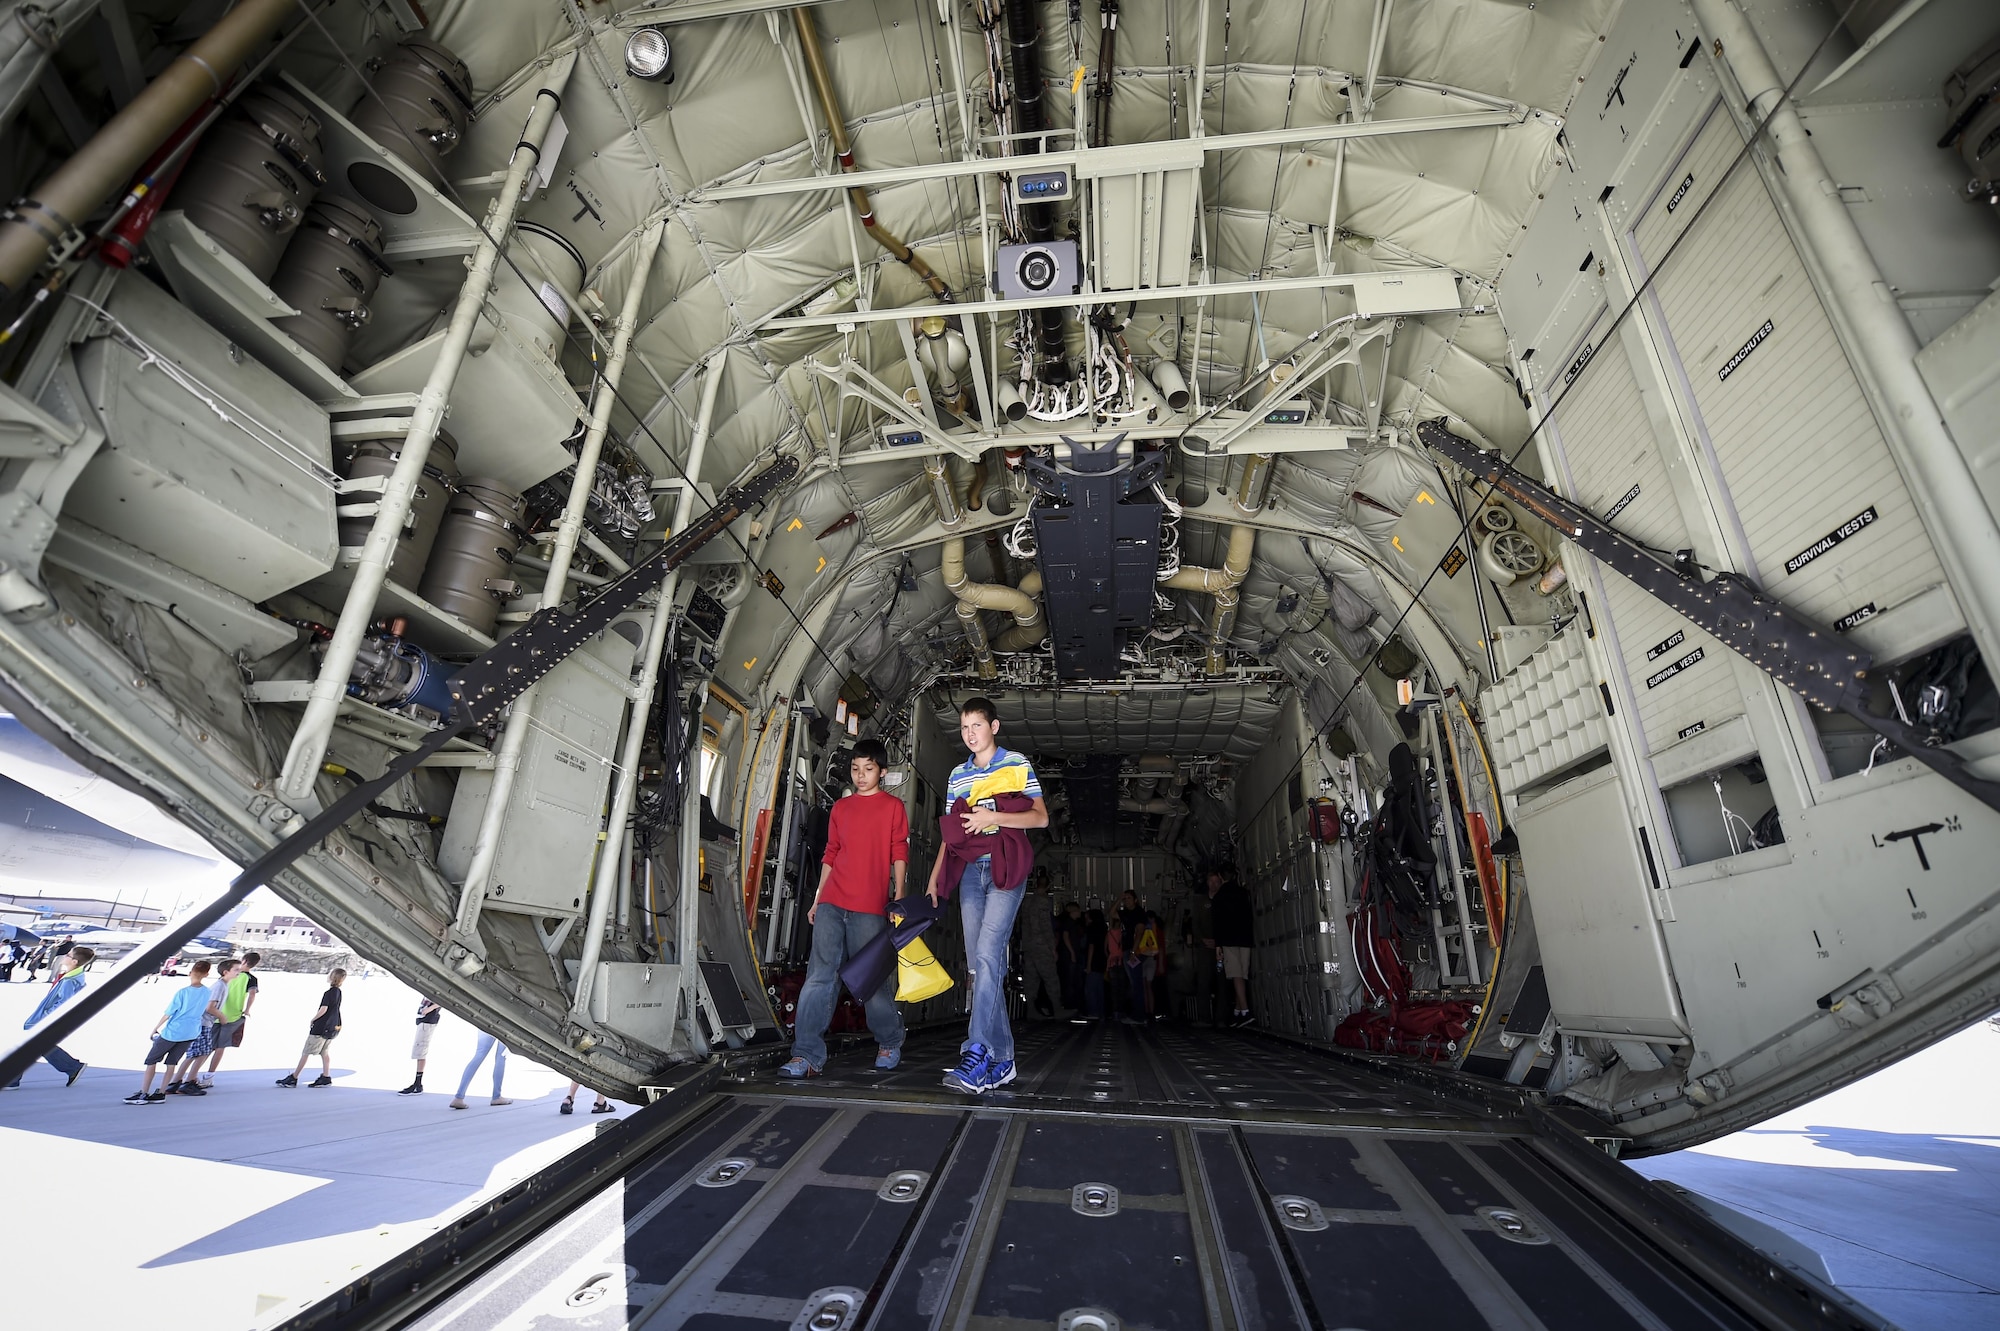 Students tour the interior of a C130 during the fourth annual New Mexico Aviation Aerospace Association Career Expo Oct. 6, 2016 at Holloman Air Force Base N.M. About 2,500 middle school through college-level students from across New Mexico came out to learn about the science, technology, engineering and mathematics fields. The goal of STEM is to motivate and educate students by giving them a taste of what aviation and aerospace engineering is all about. These STEM events also get the students talking to people who are working directly in STEM industries.  (U.S. Air Force photo by Staff Sgt. Stacy Jonsgaard)